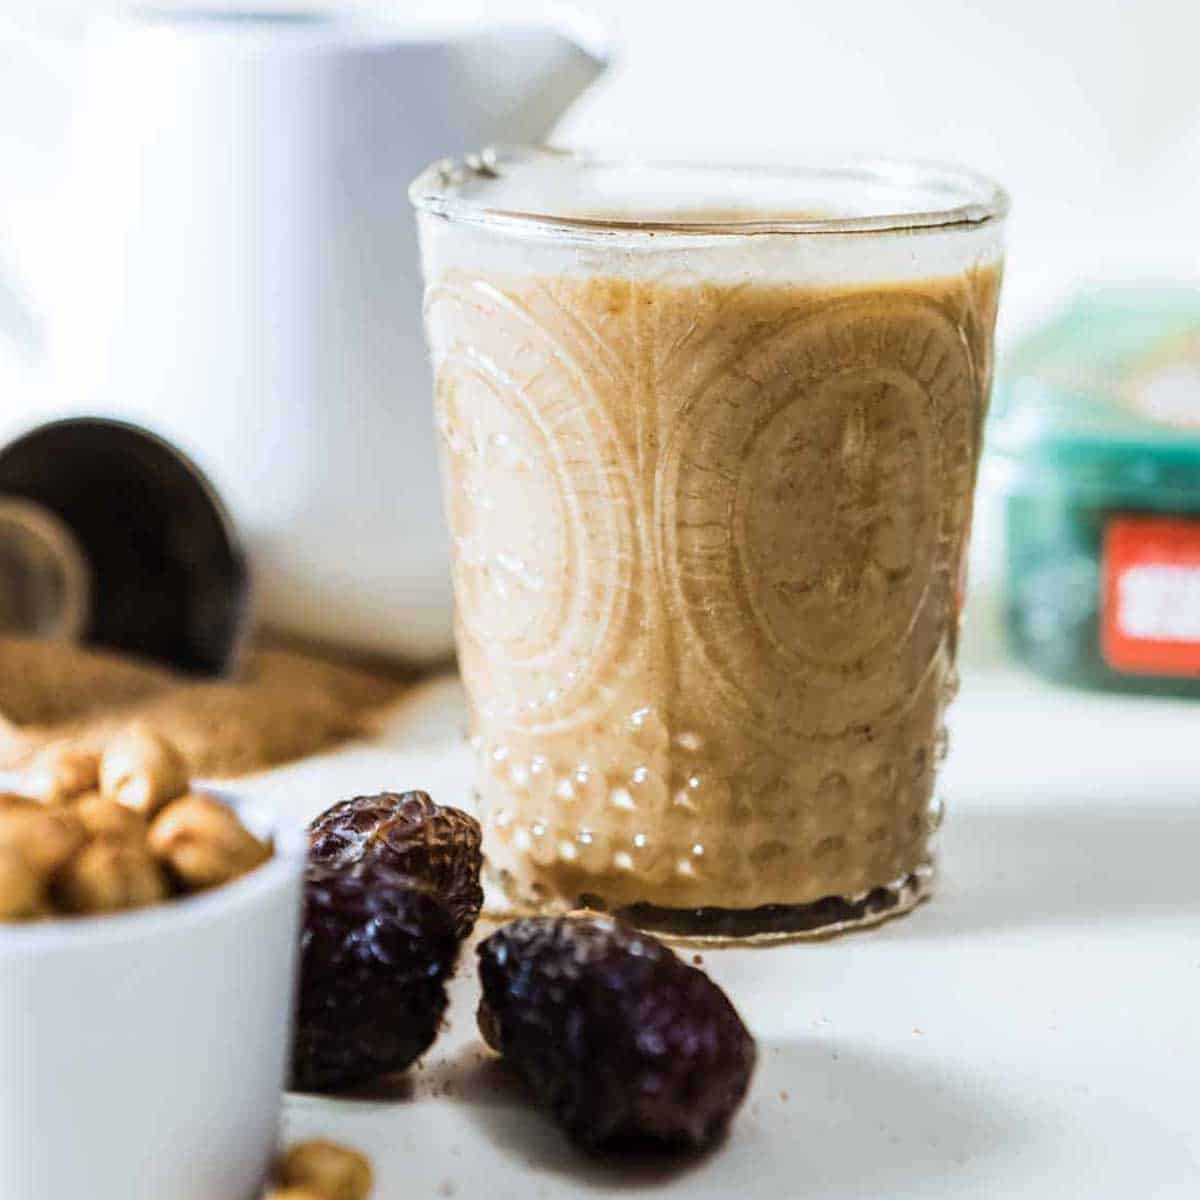 Healthy caramel protein shake in an etched glass next to pitted dates and a white bowl of cashews.